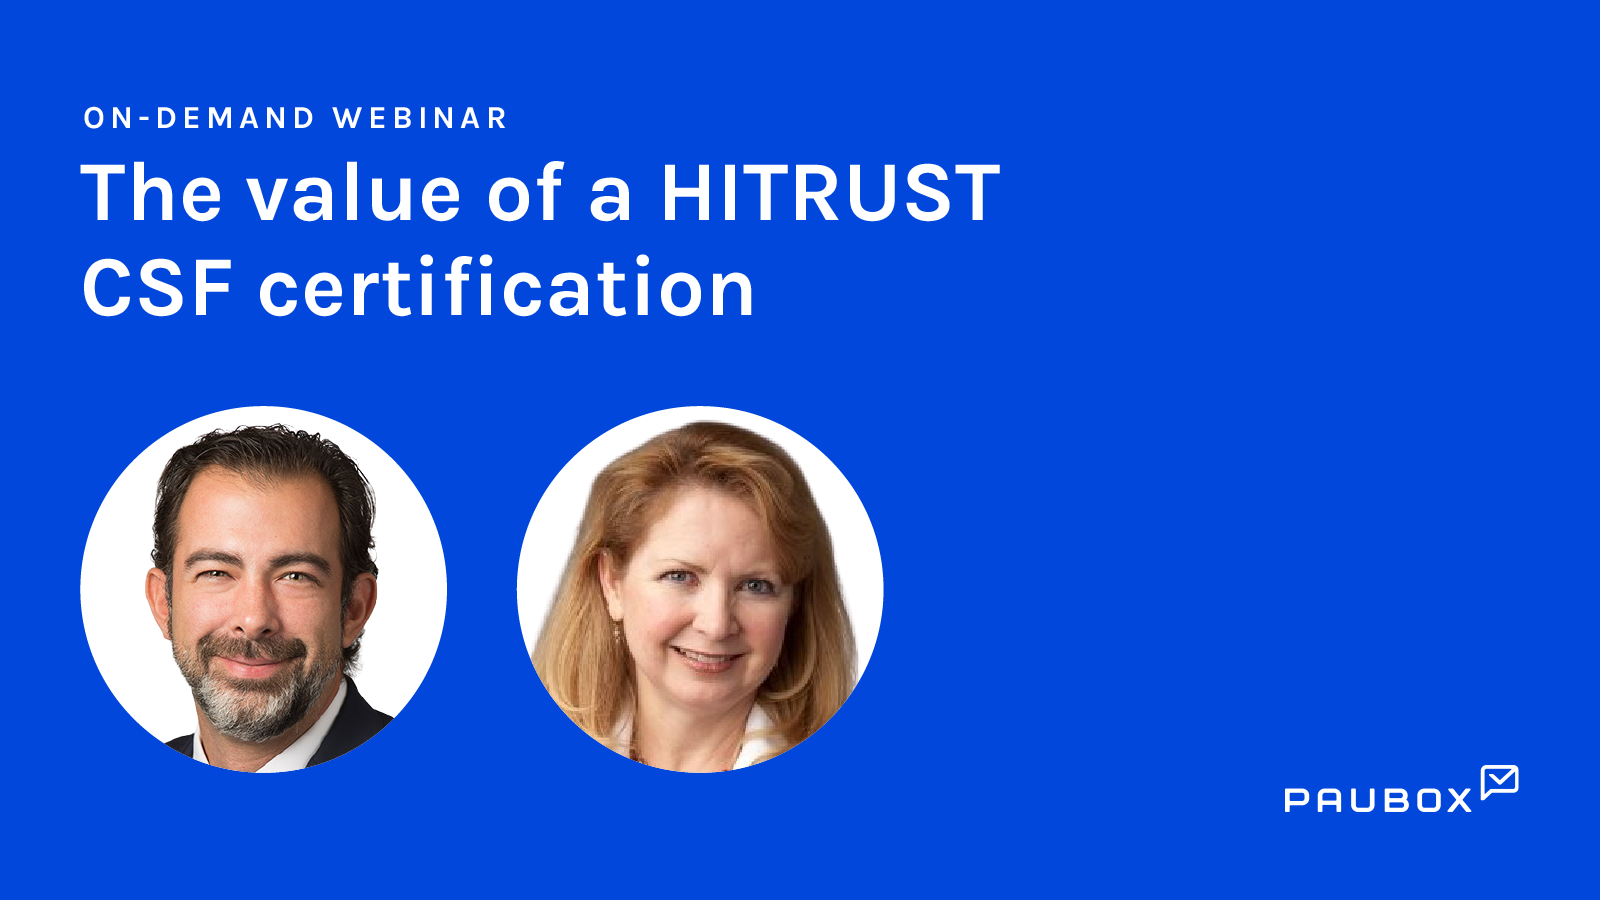 The value of a HITRUST CSF certification and picking the right assessor